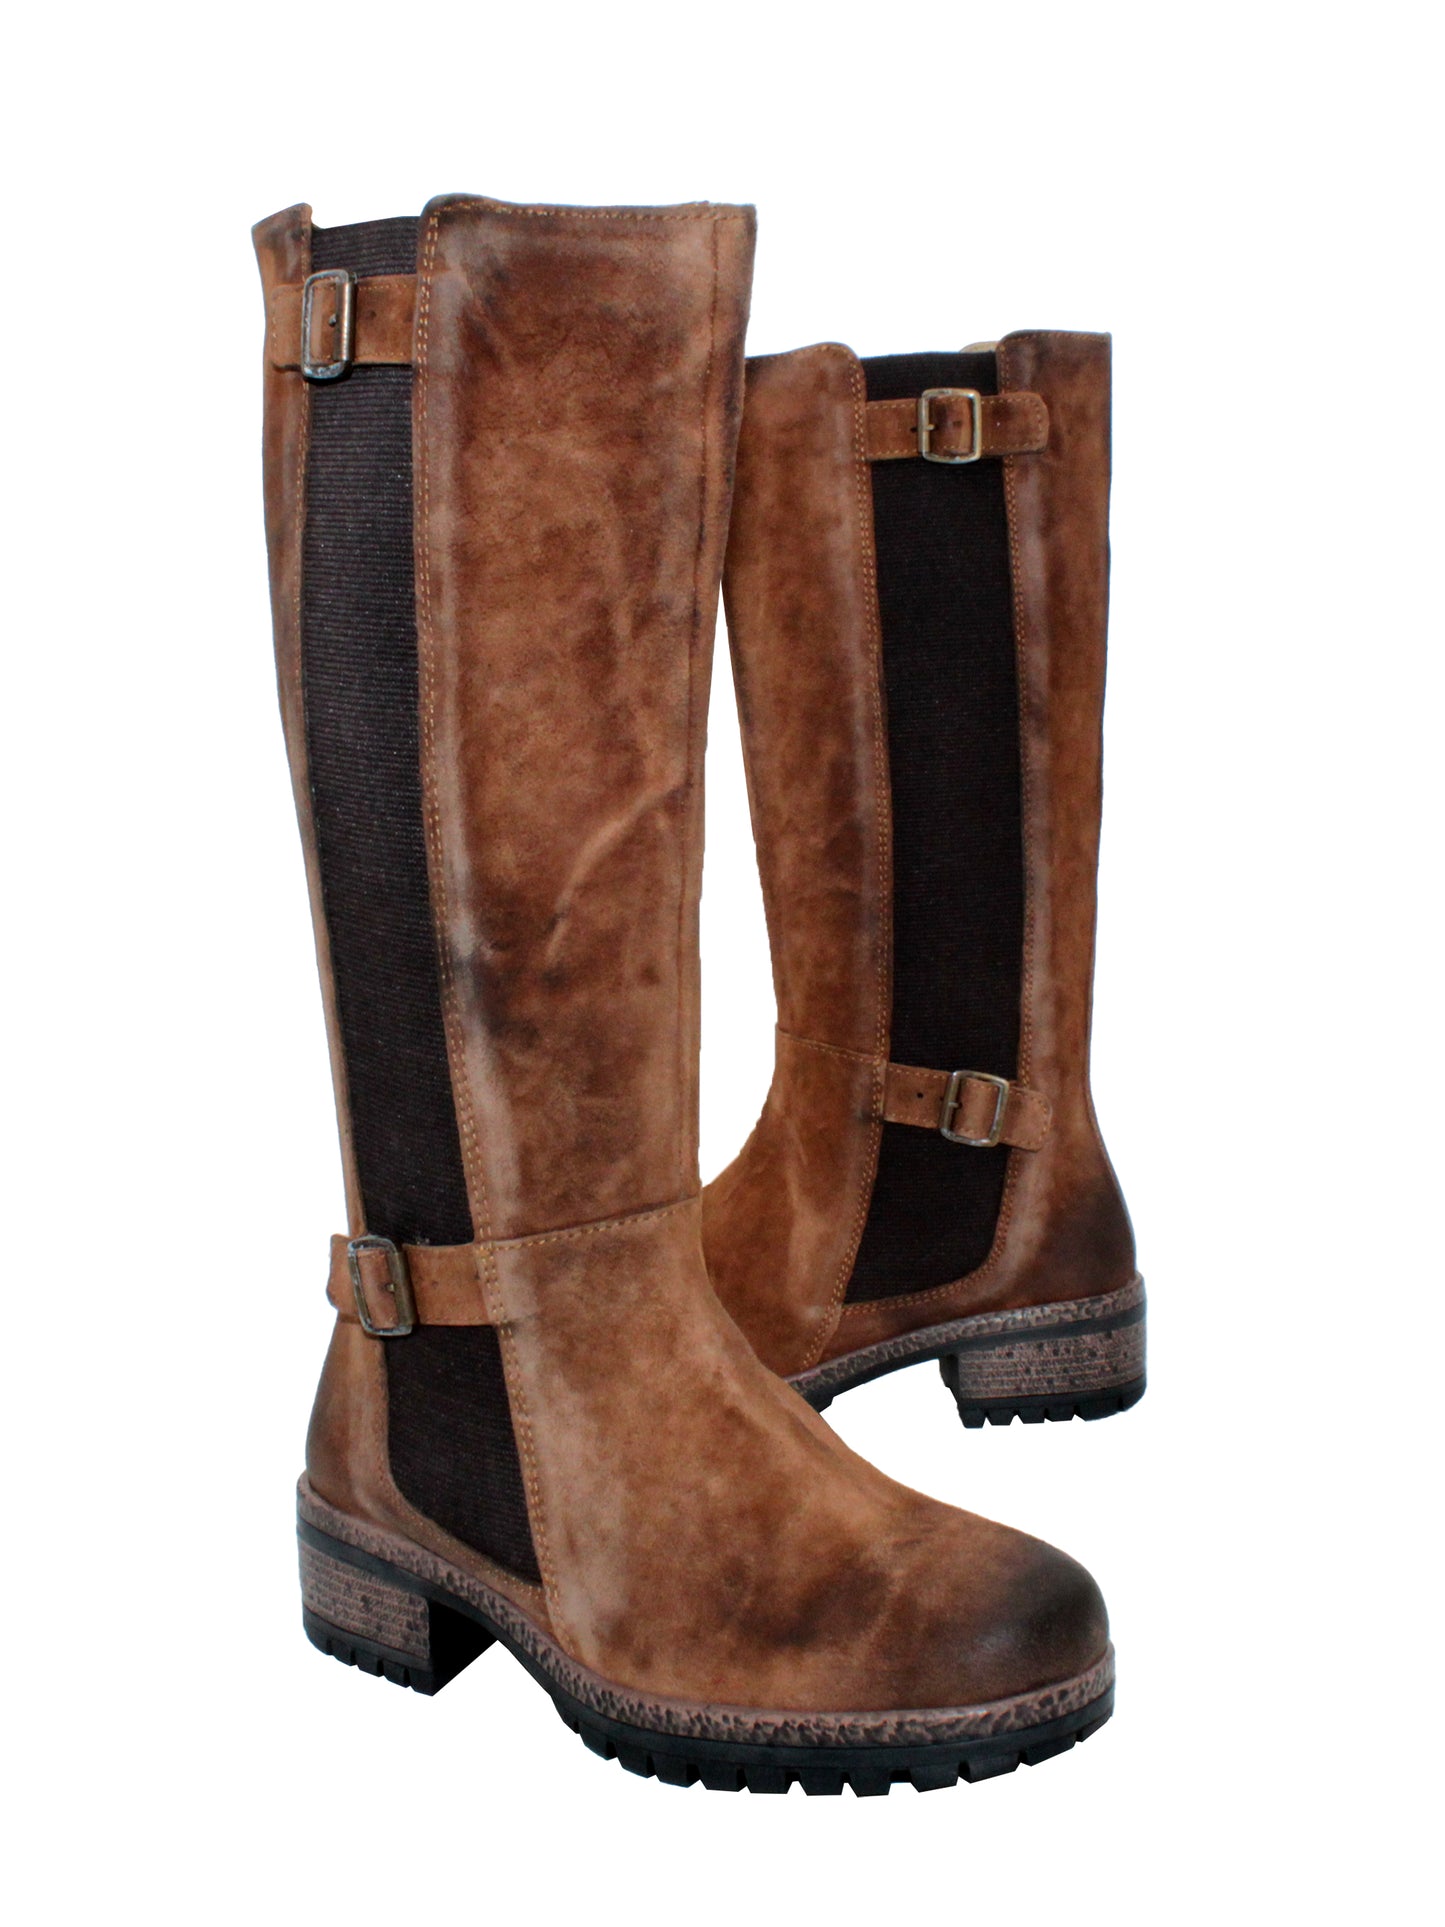 Very Volatile’s ‘Mitchell’ lug bottom boots are tough yet chic, bold yet ultra-versatile, and set on comfortable, chunky lug soles. Featuring adjustable double buckle accents with elastic goring, partial inside zipper, so all you need to use is the zipper to slip these on and go. Pair these with everything from cropped trousers to satin slip dresses. cognac 2 